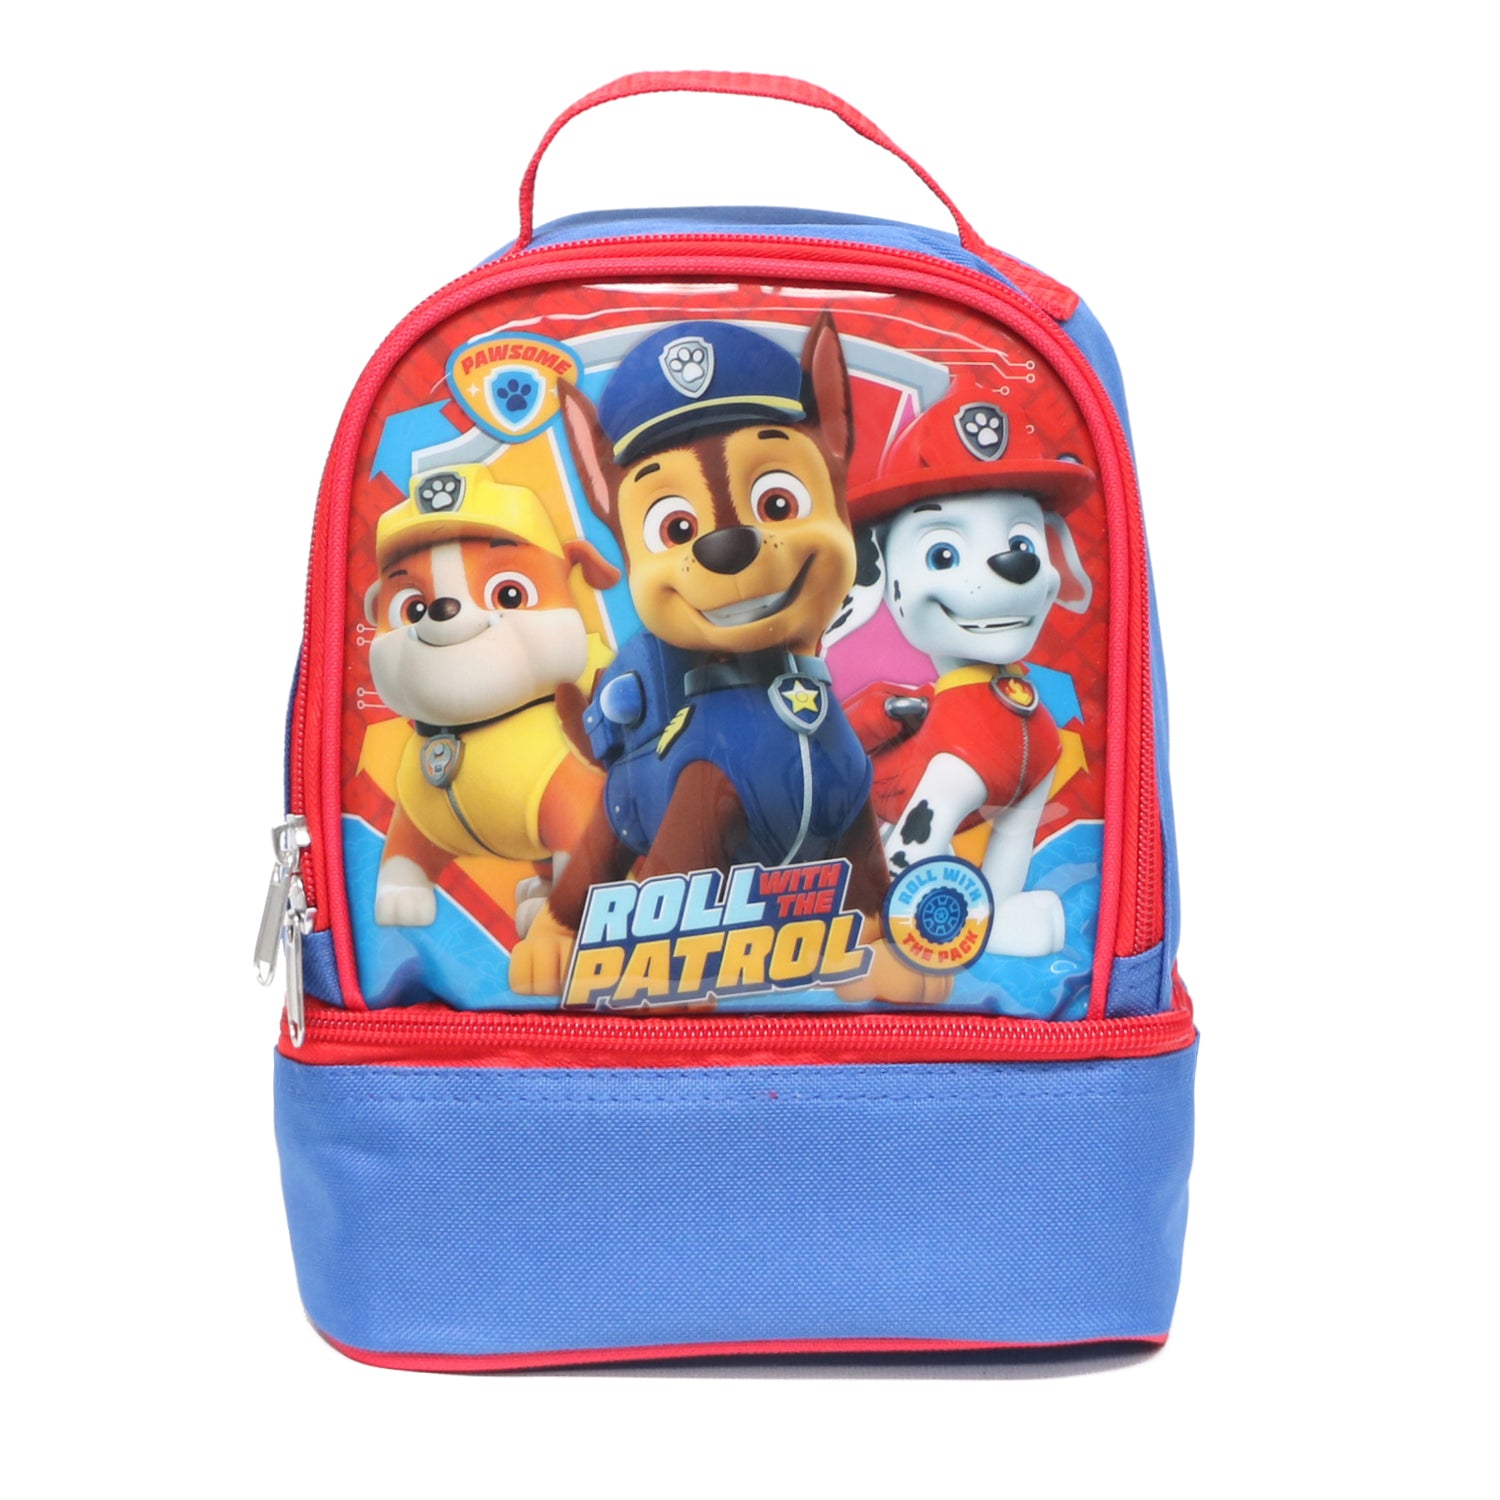 Nickelodeon Paw Patrol Dual Compartment Dome Lunch Box